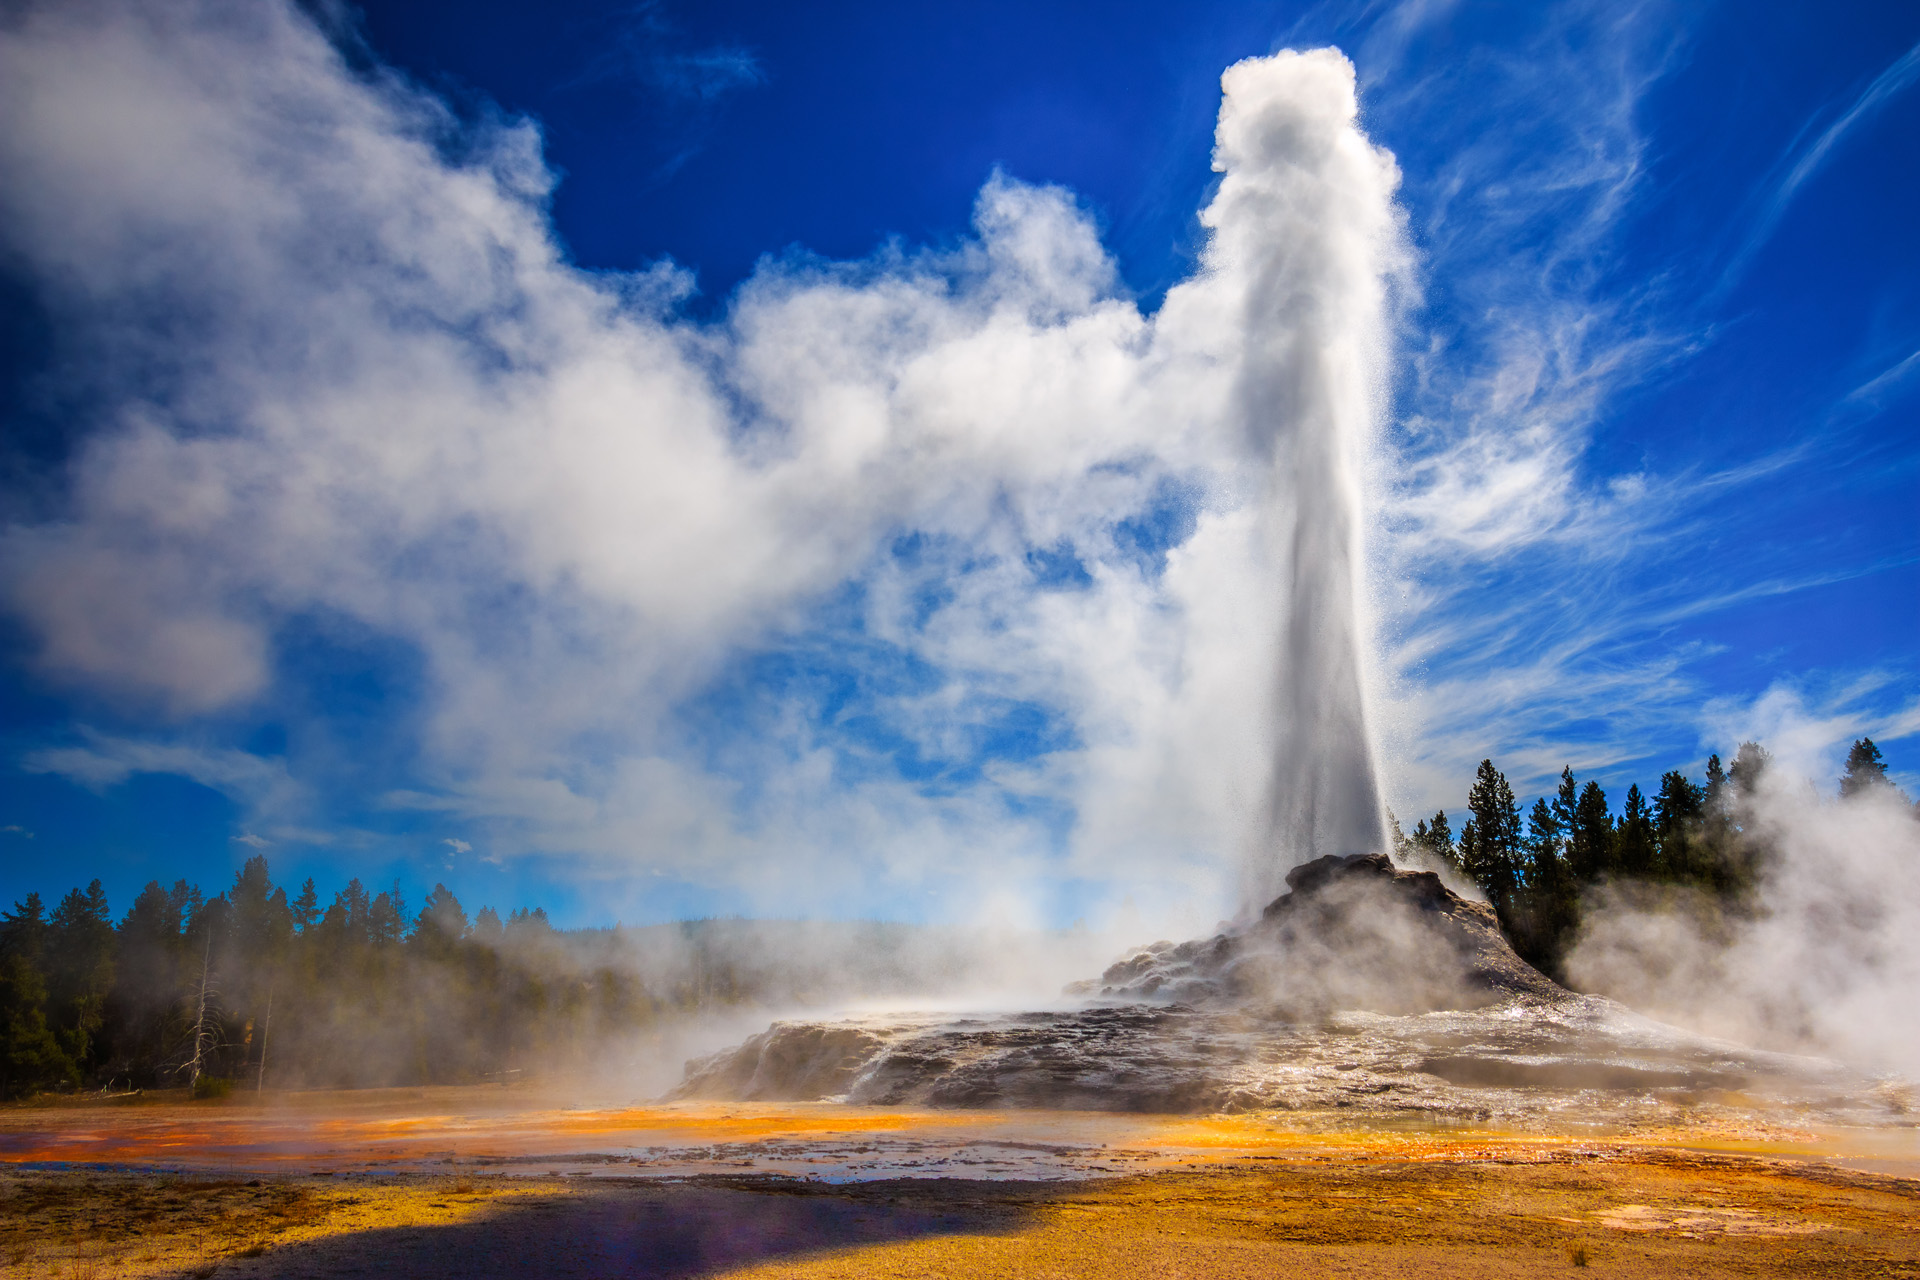 Castle Geyser erupting in Yellowstone in strong back light.